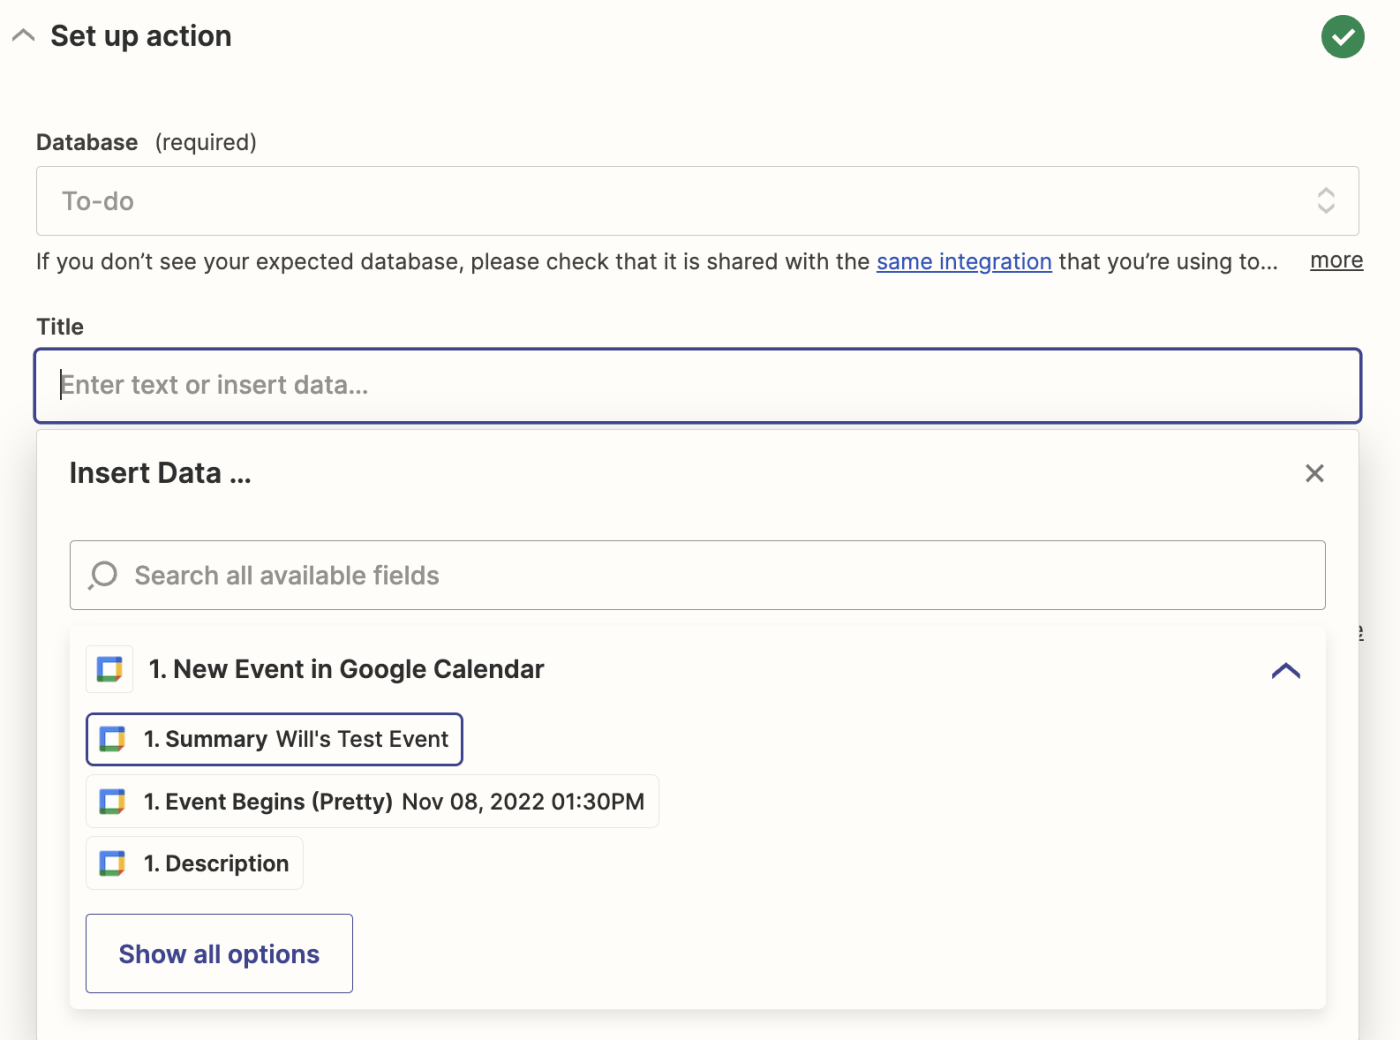 A list of data points from Google Calendar is shown in a dropdown under "Insert Data".